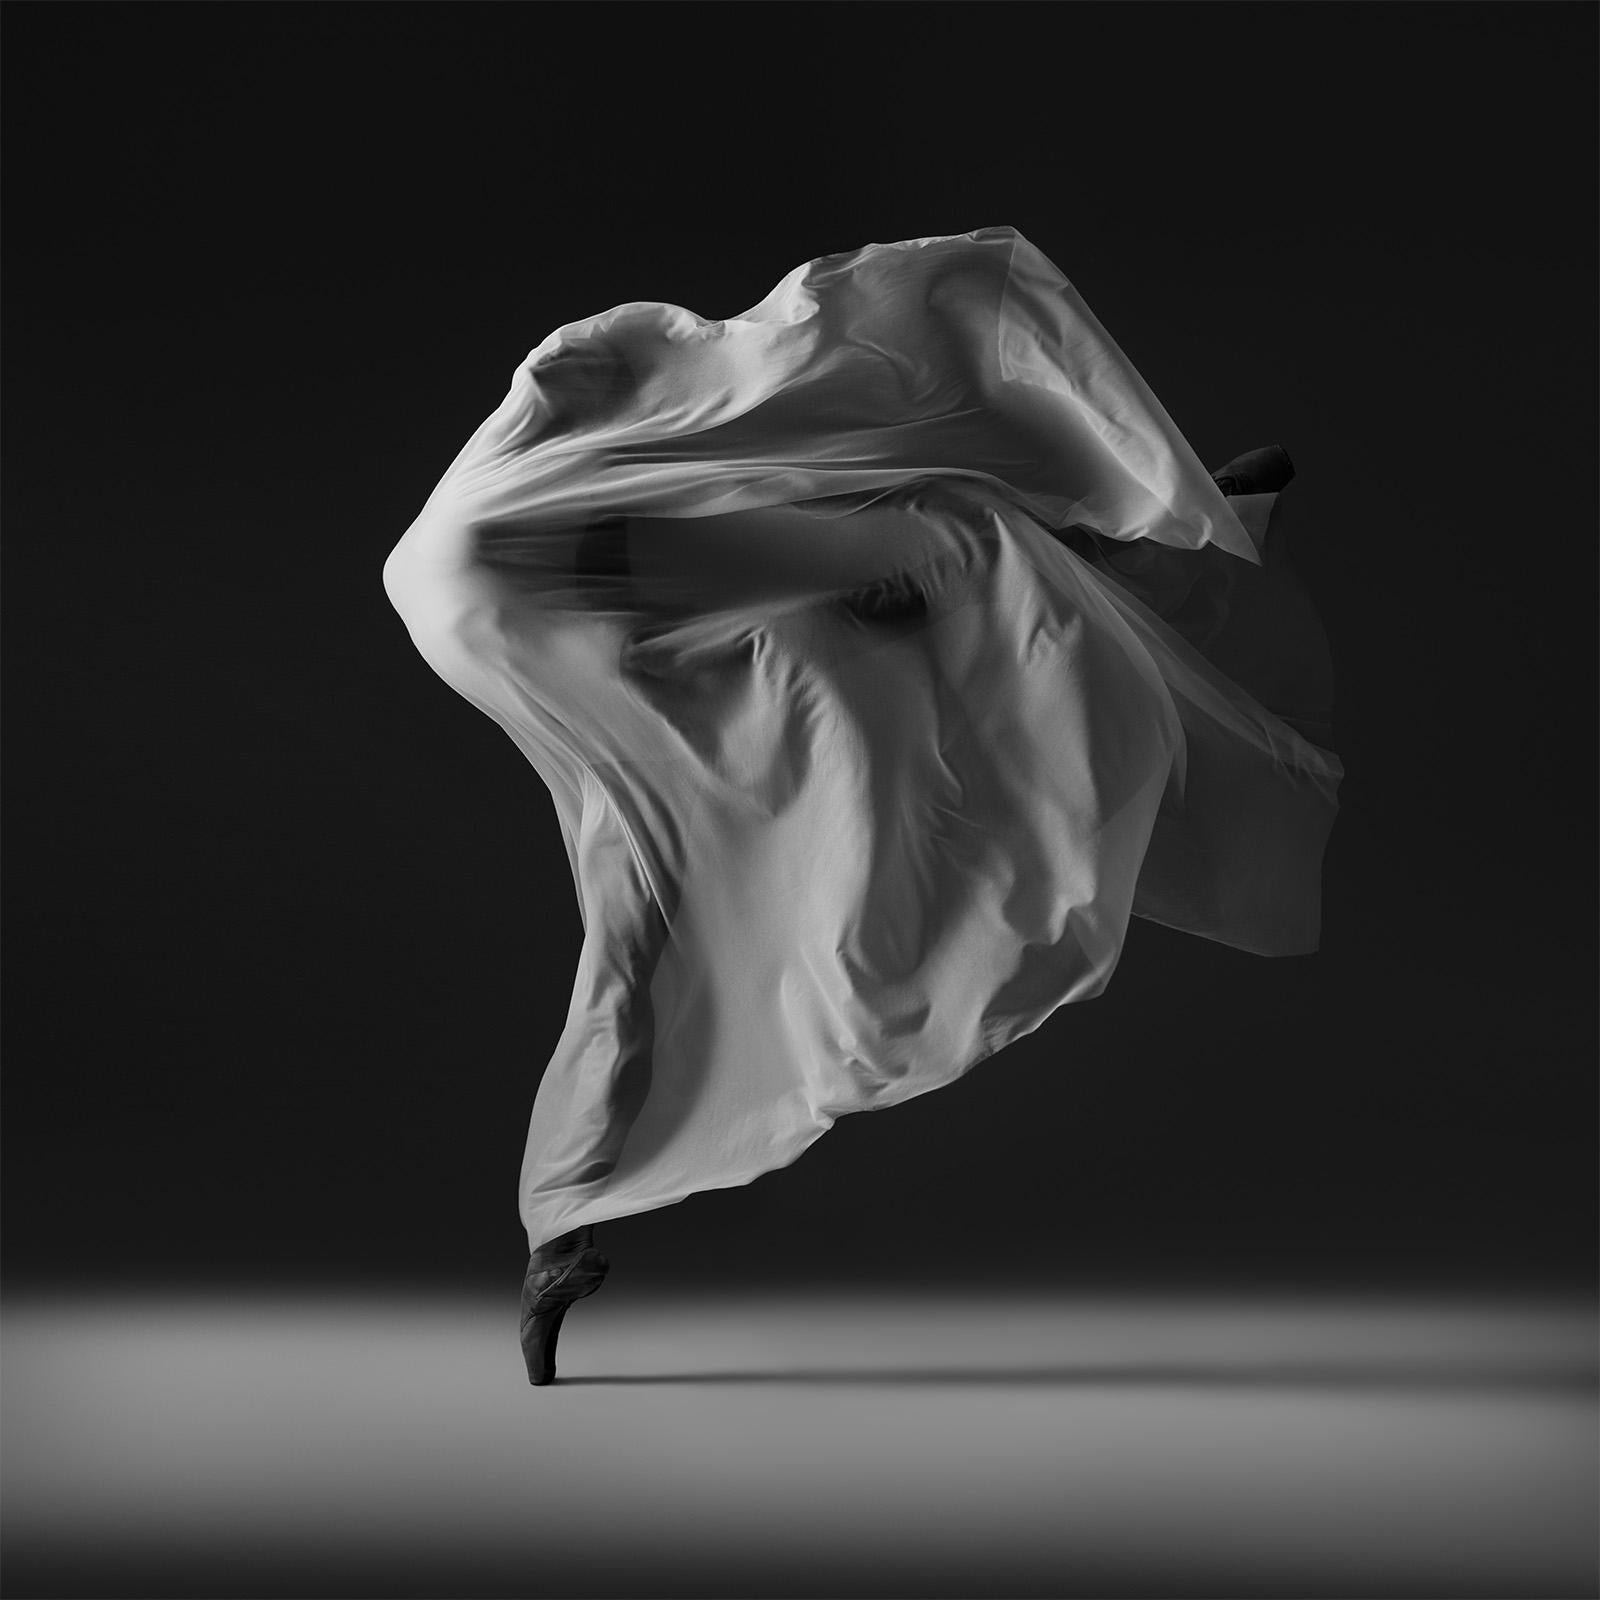 No title (No 29)
Photography 
Edition of 18 (39" x 39" inch) by Yevgeniy Repiashenko
Year photo was taken: 2016
Limited Edition of 18

Unframed - ships in a tube 

This picture is a part of Spirit series.
Magic dance movement. 

This is an archival